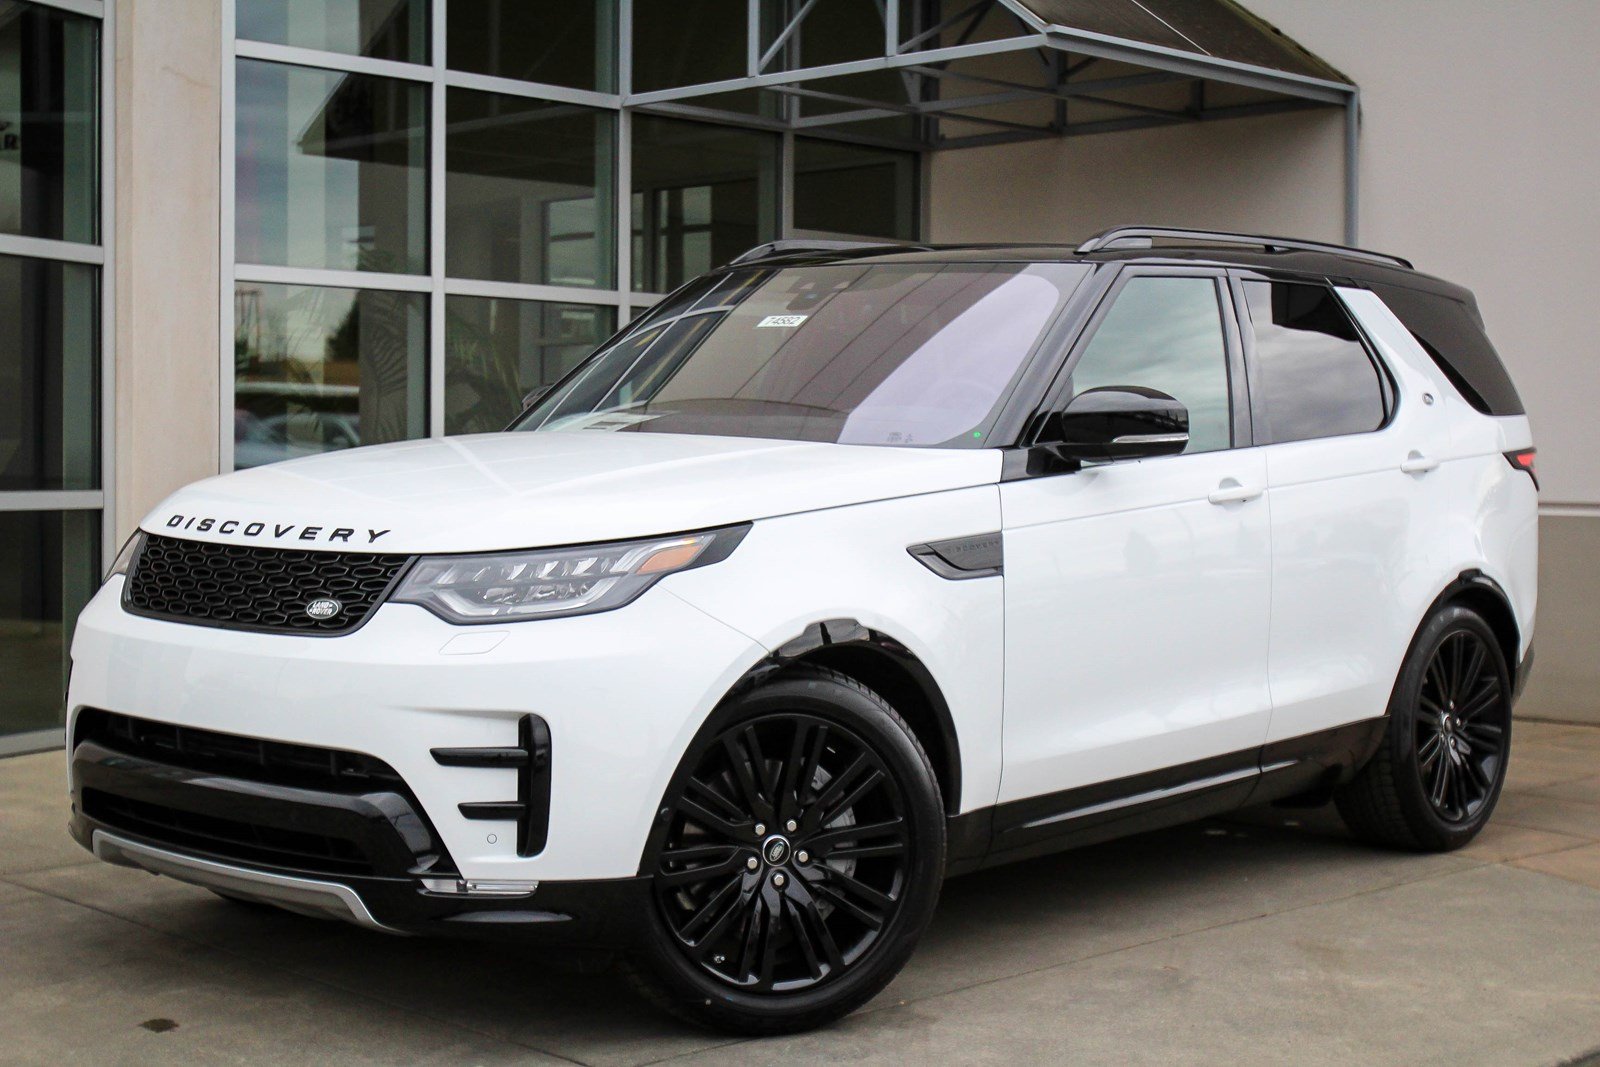 New 2019 Land Rover Discovery Hse Sport Utility In Bellevue 74582